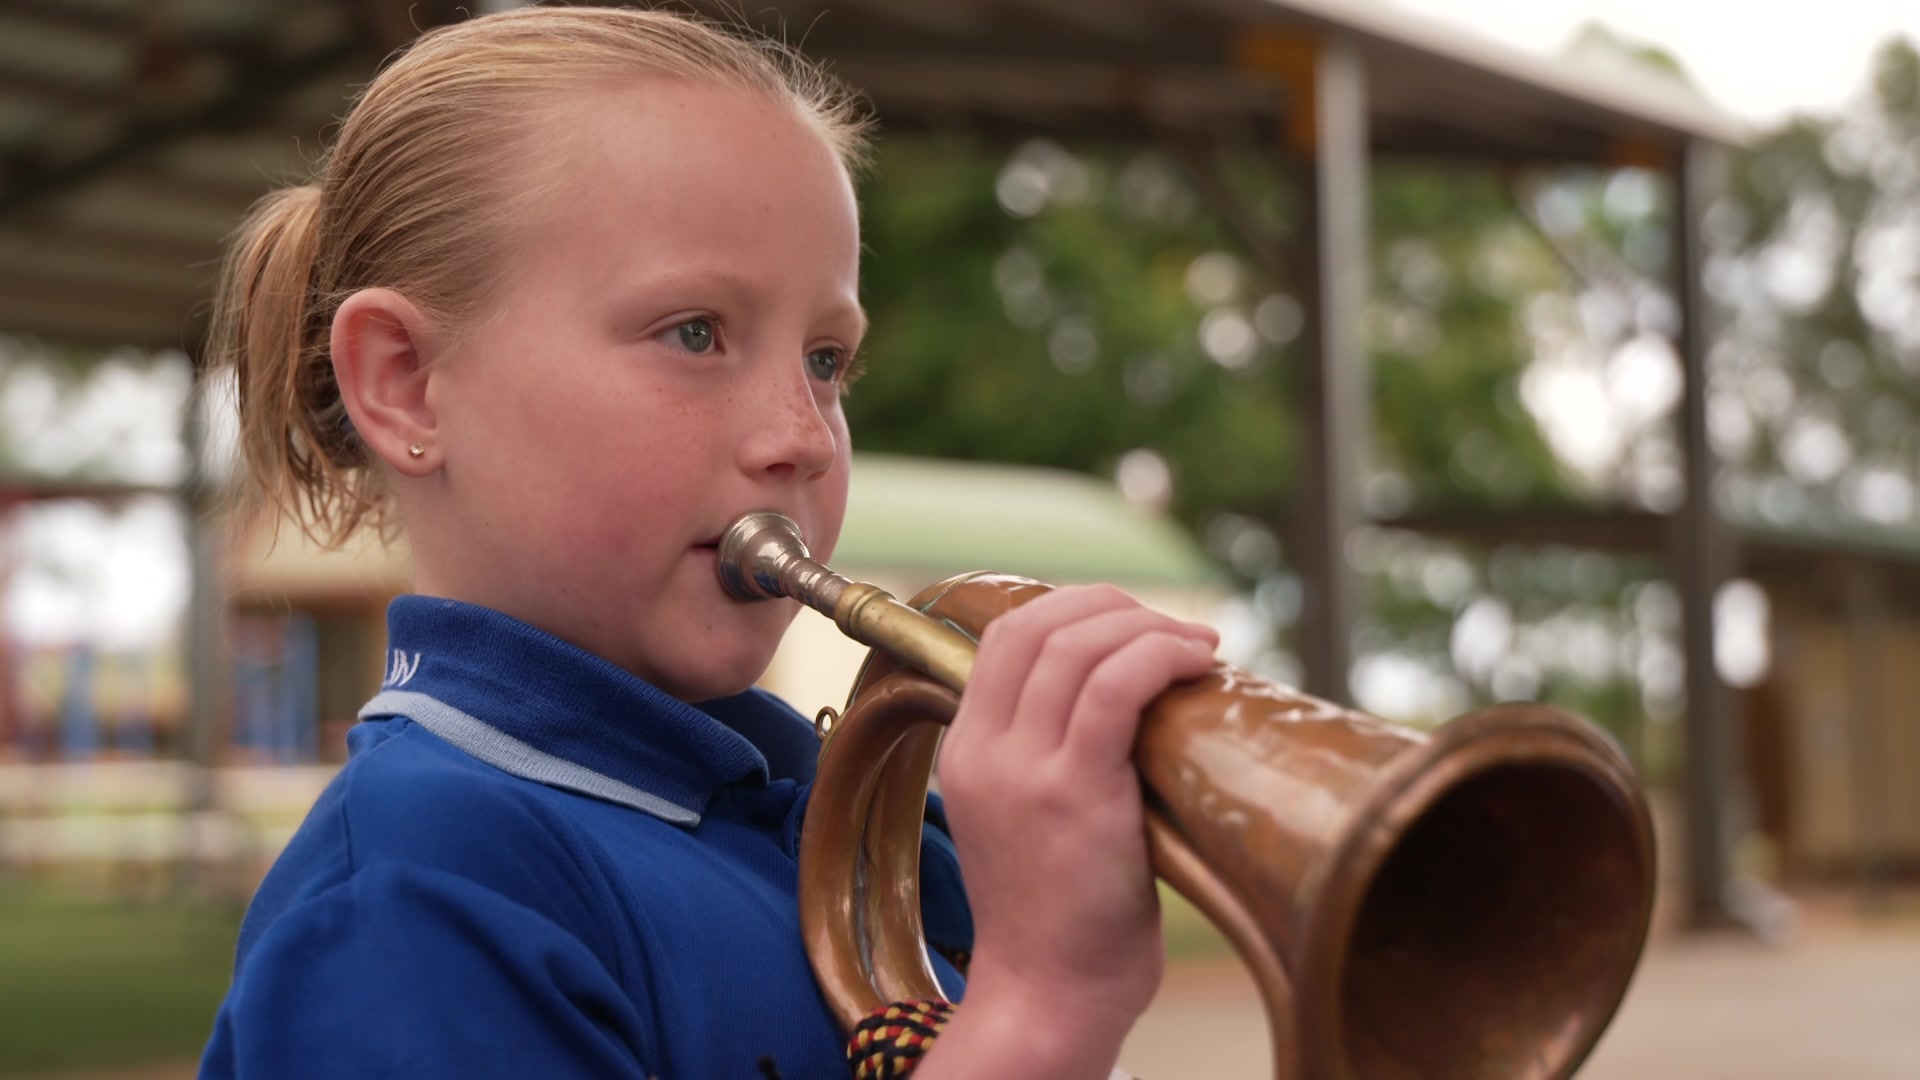 Close-up photo of a young girl playing the bugle. She is wearing a blue school uniform.